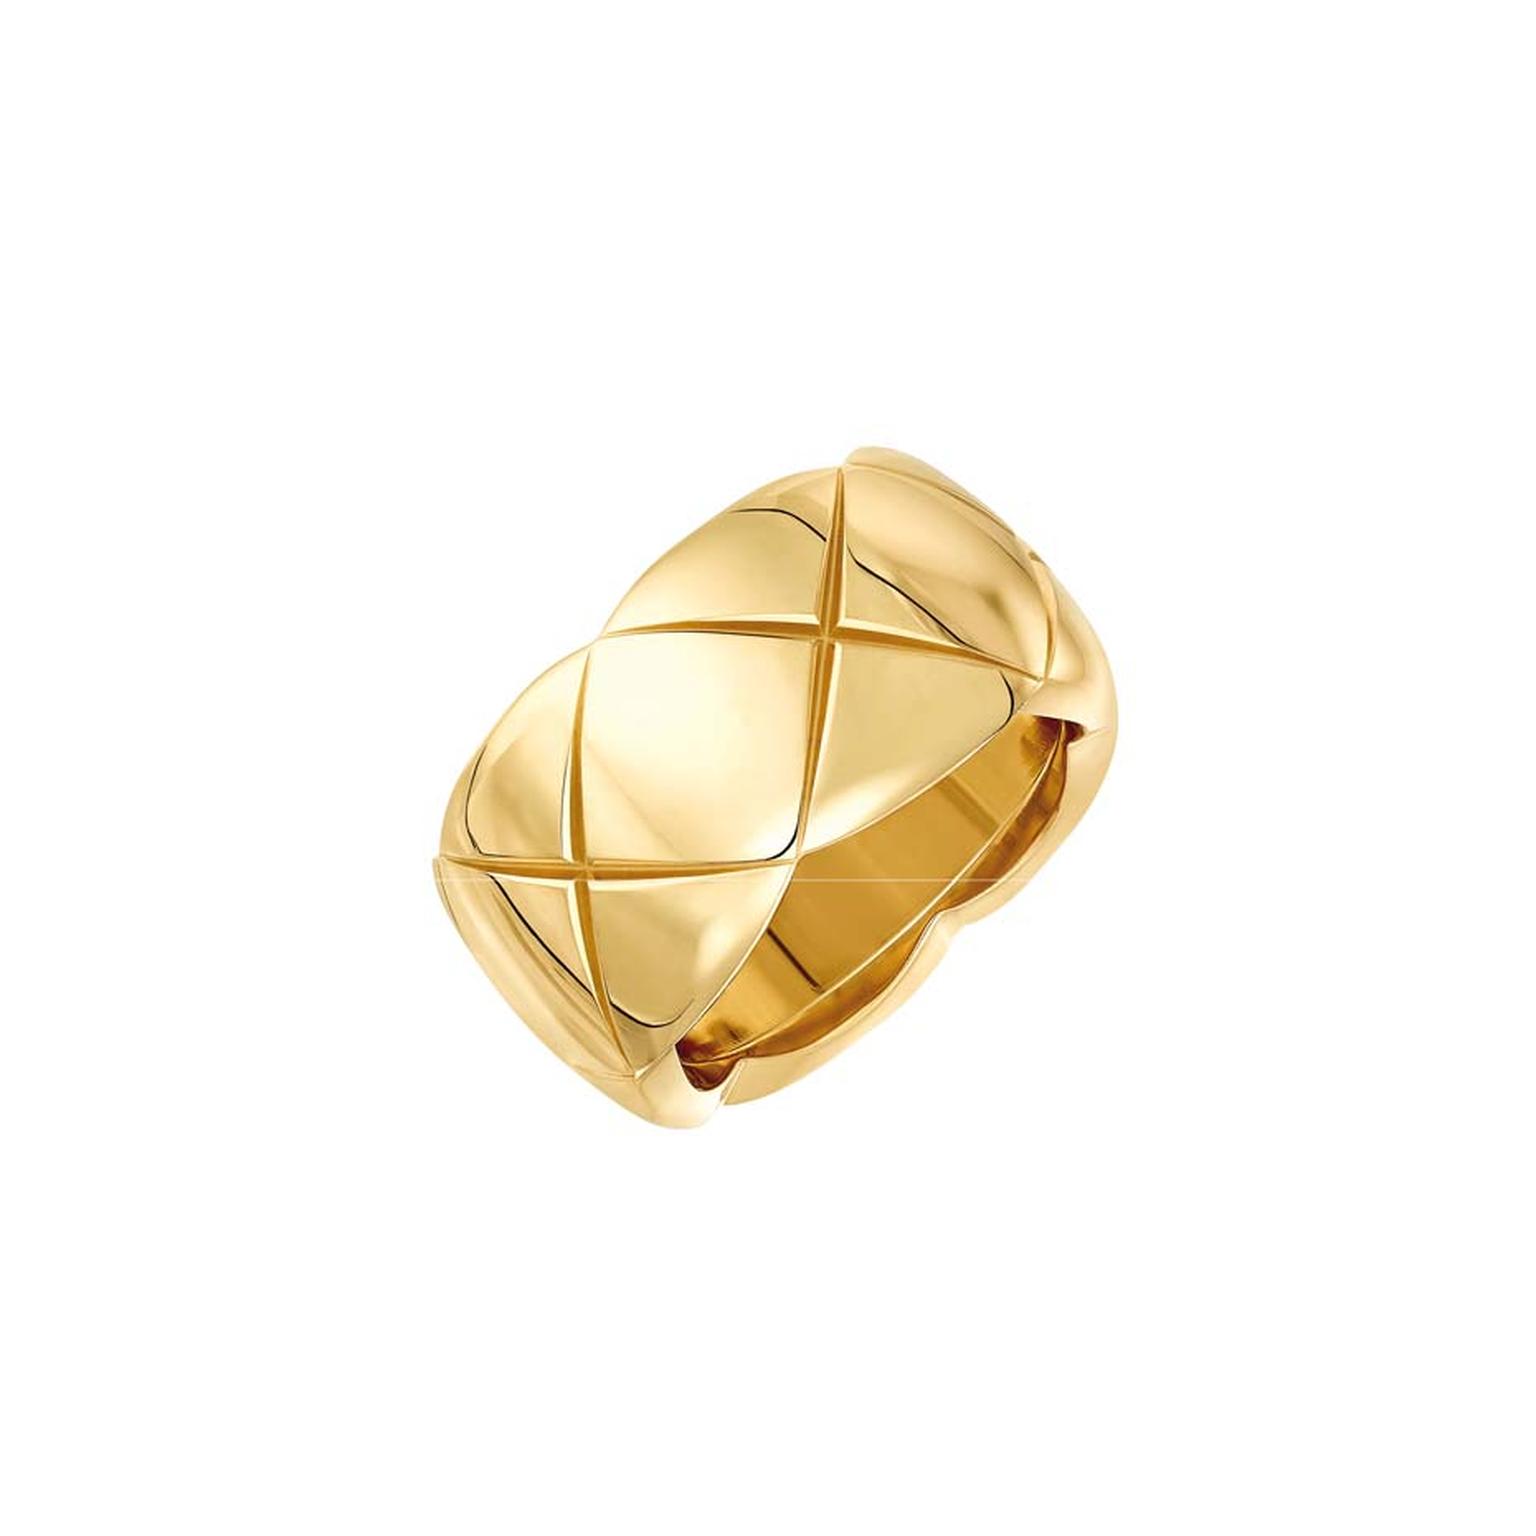 Small yellow gold Coco Crush ring from Chanel's new fine jewellery collection, available for a limited time only at Net-a-Porter.